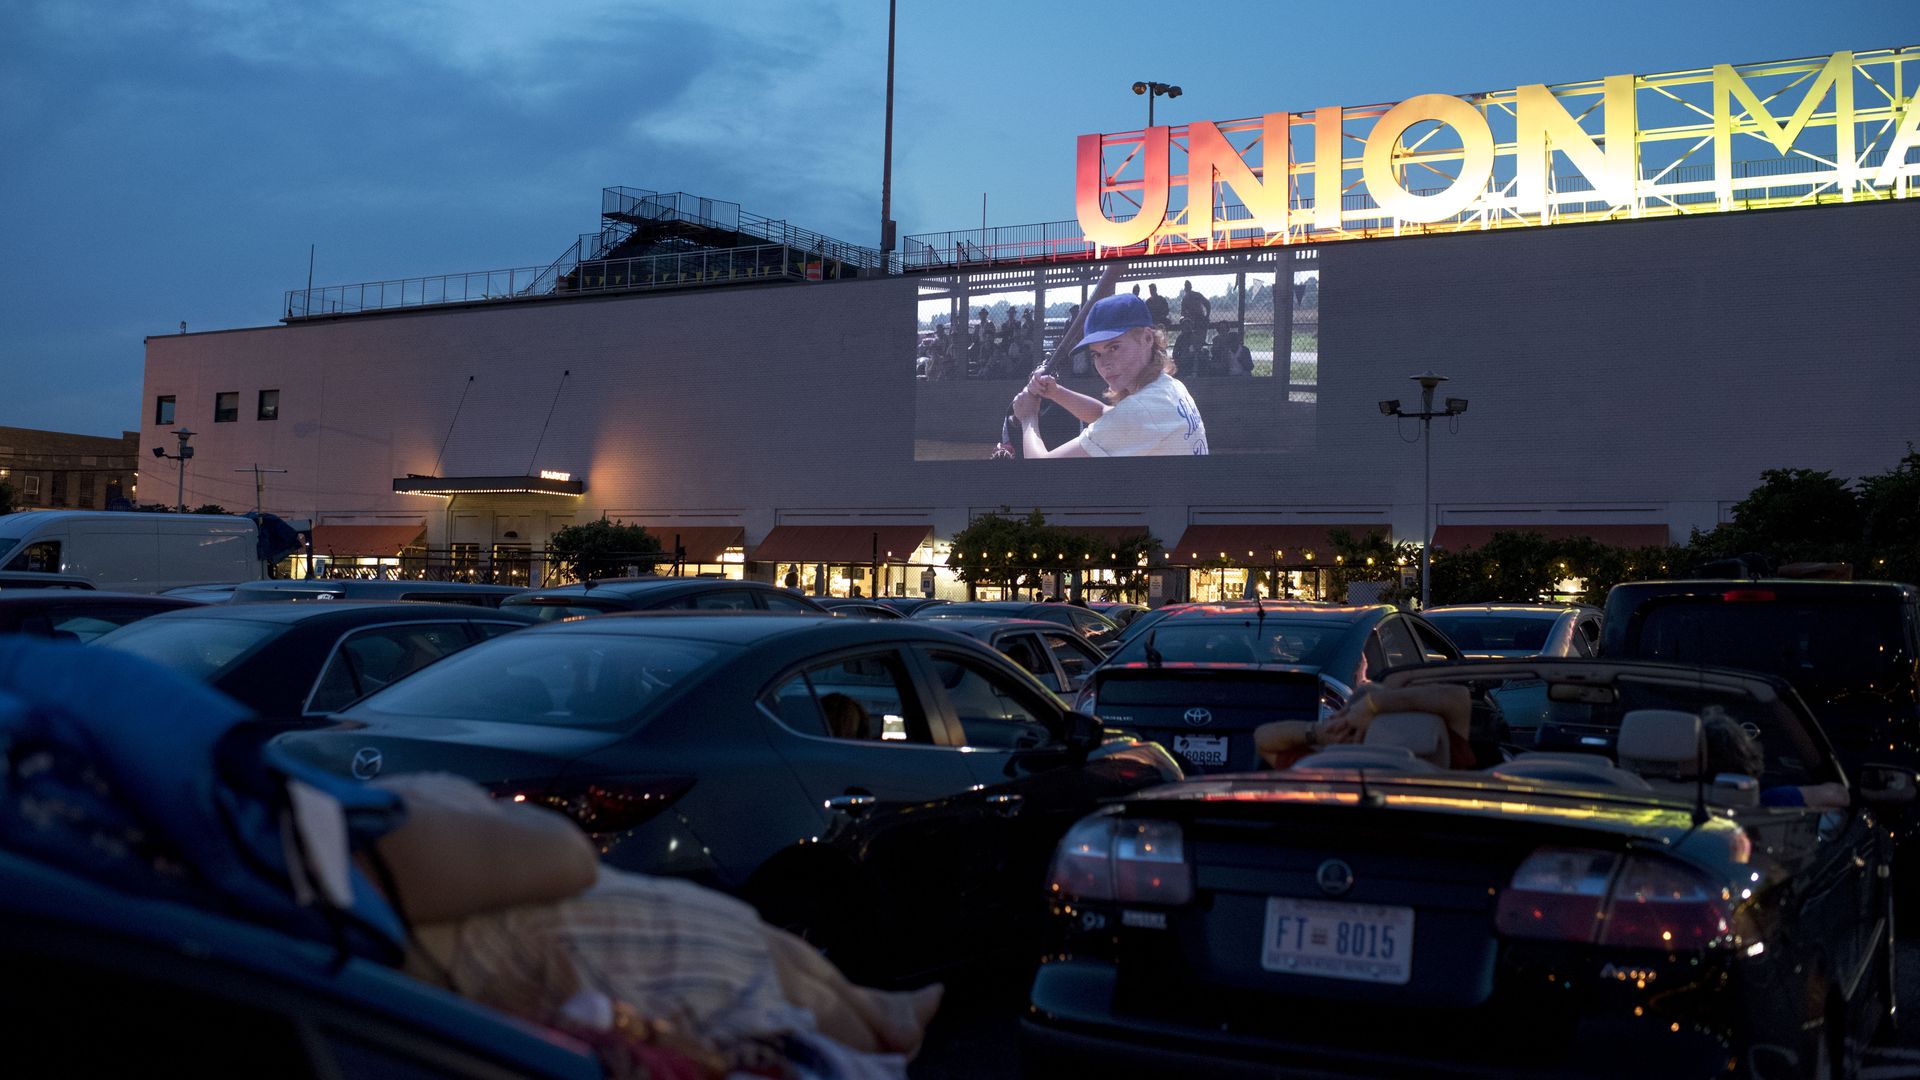 In this image, a girl holding a baseball bat is projected on the side of a building in front of cars